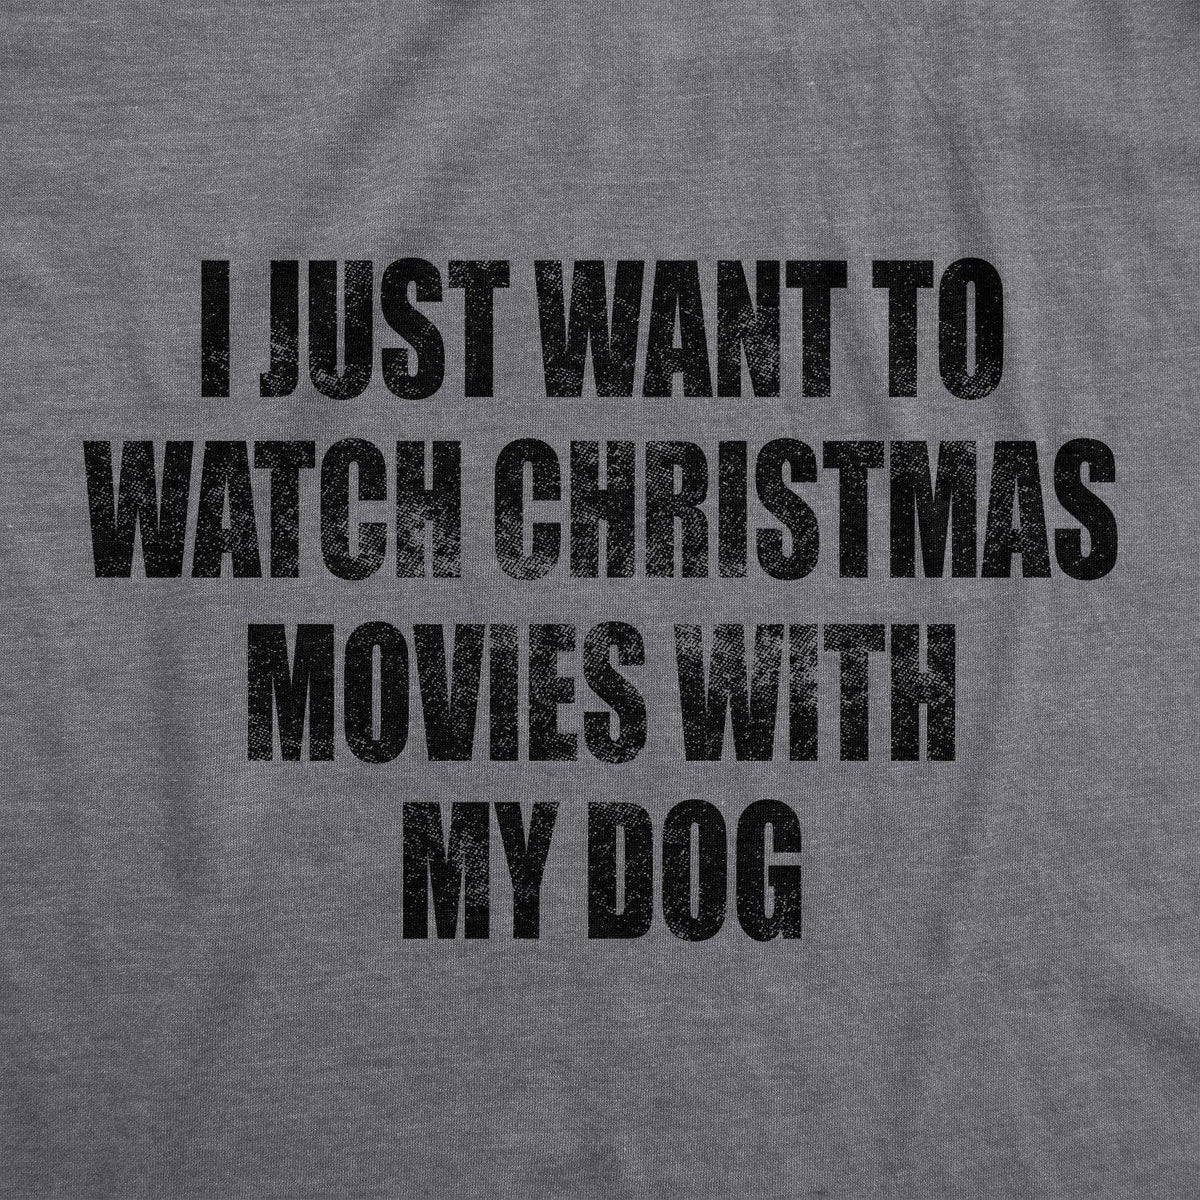 I Just Want To Watch Christmas Movies With My Dog Women&#39;s Tshirt - Crazy Dog T-Shirts